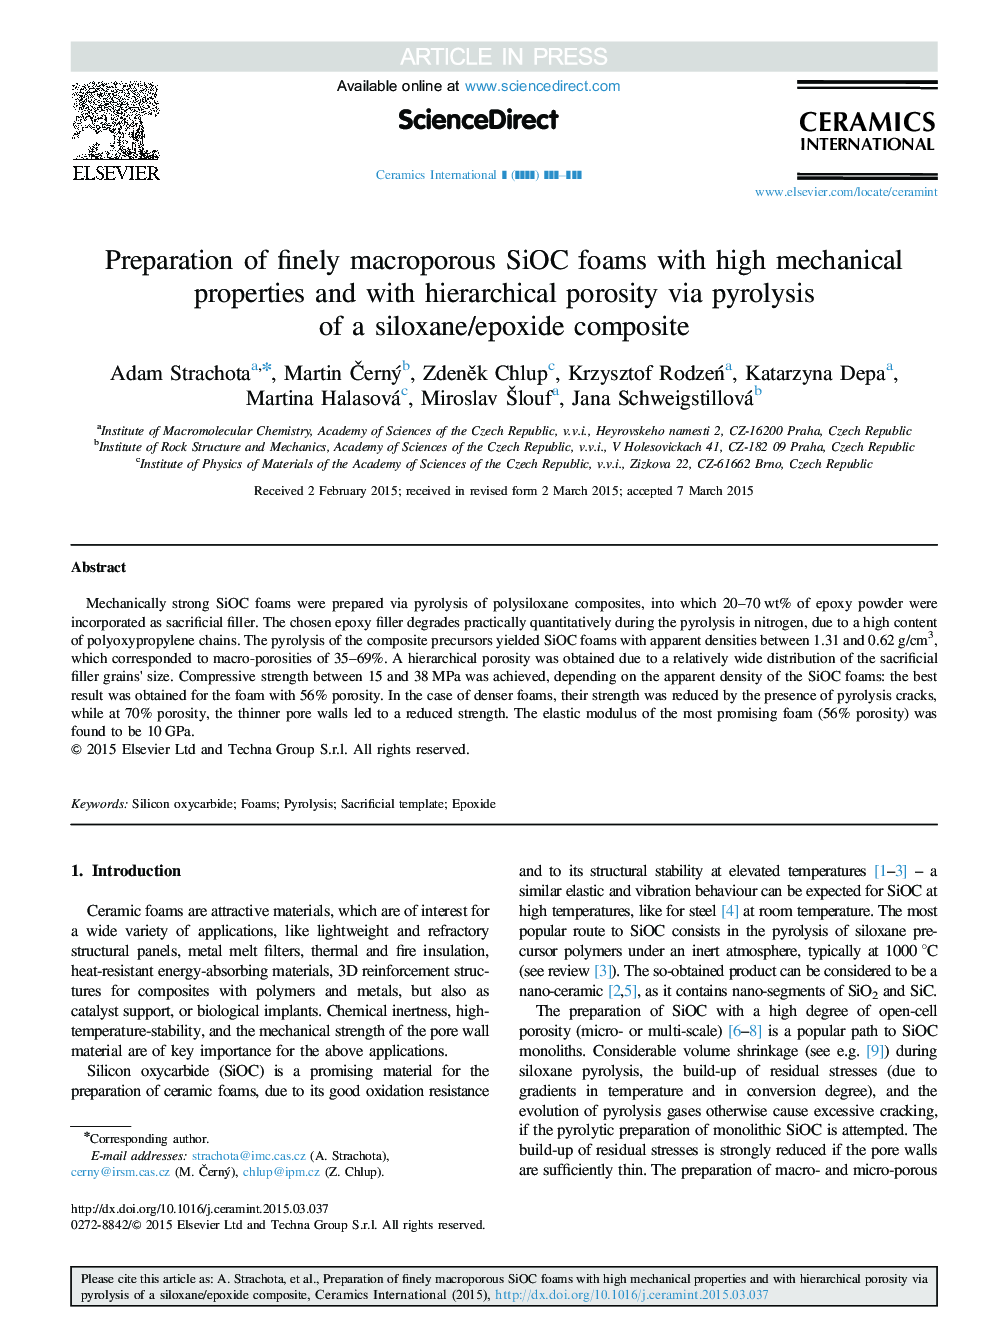 Preparation of finely macroporous SiOC foams with high mechanical properties and with hierarchical porosity via pyrolysis of a siloxane/epoxide composite